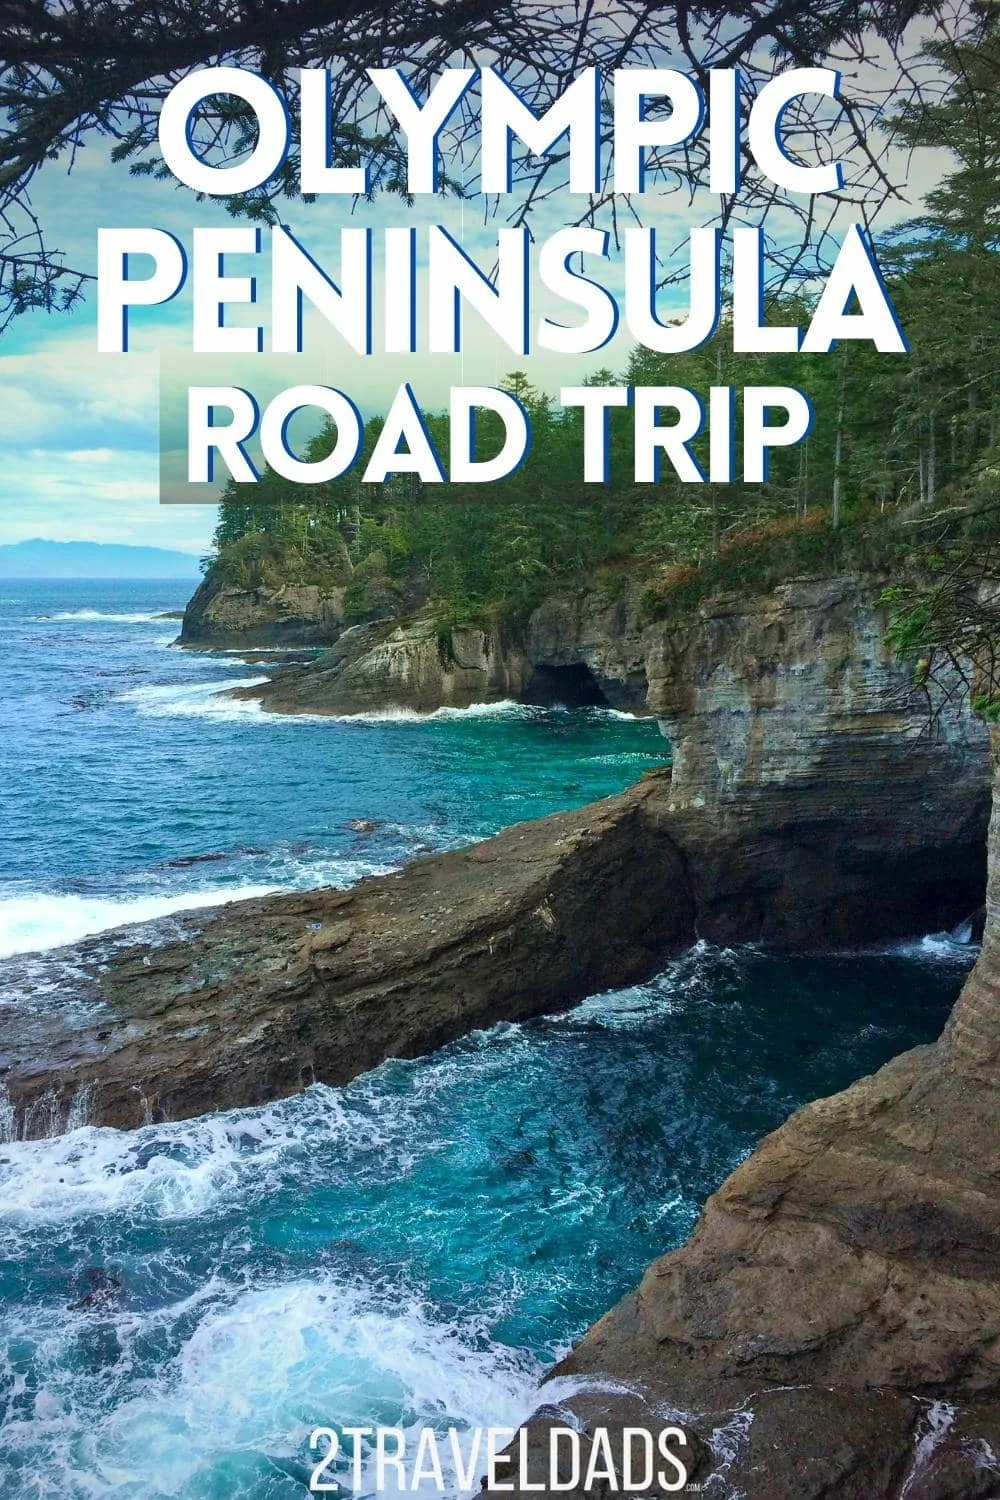 An Olympic Peninsula Road Trip is a great weekend getaway or local vacation near Seattle. See the best stops around Highway 101, waterfalls and hikes in Olympic National Park, beautiful small towns and the rugged Washington Coast. Perfect Pacific Northwest vacation itinerary.